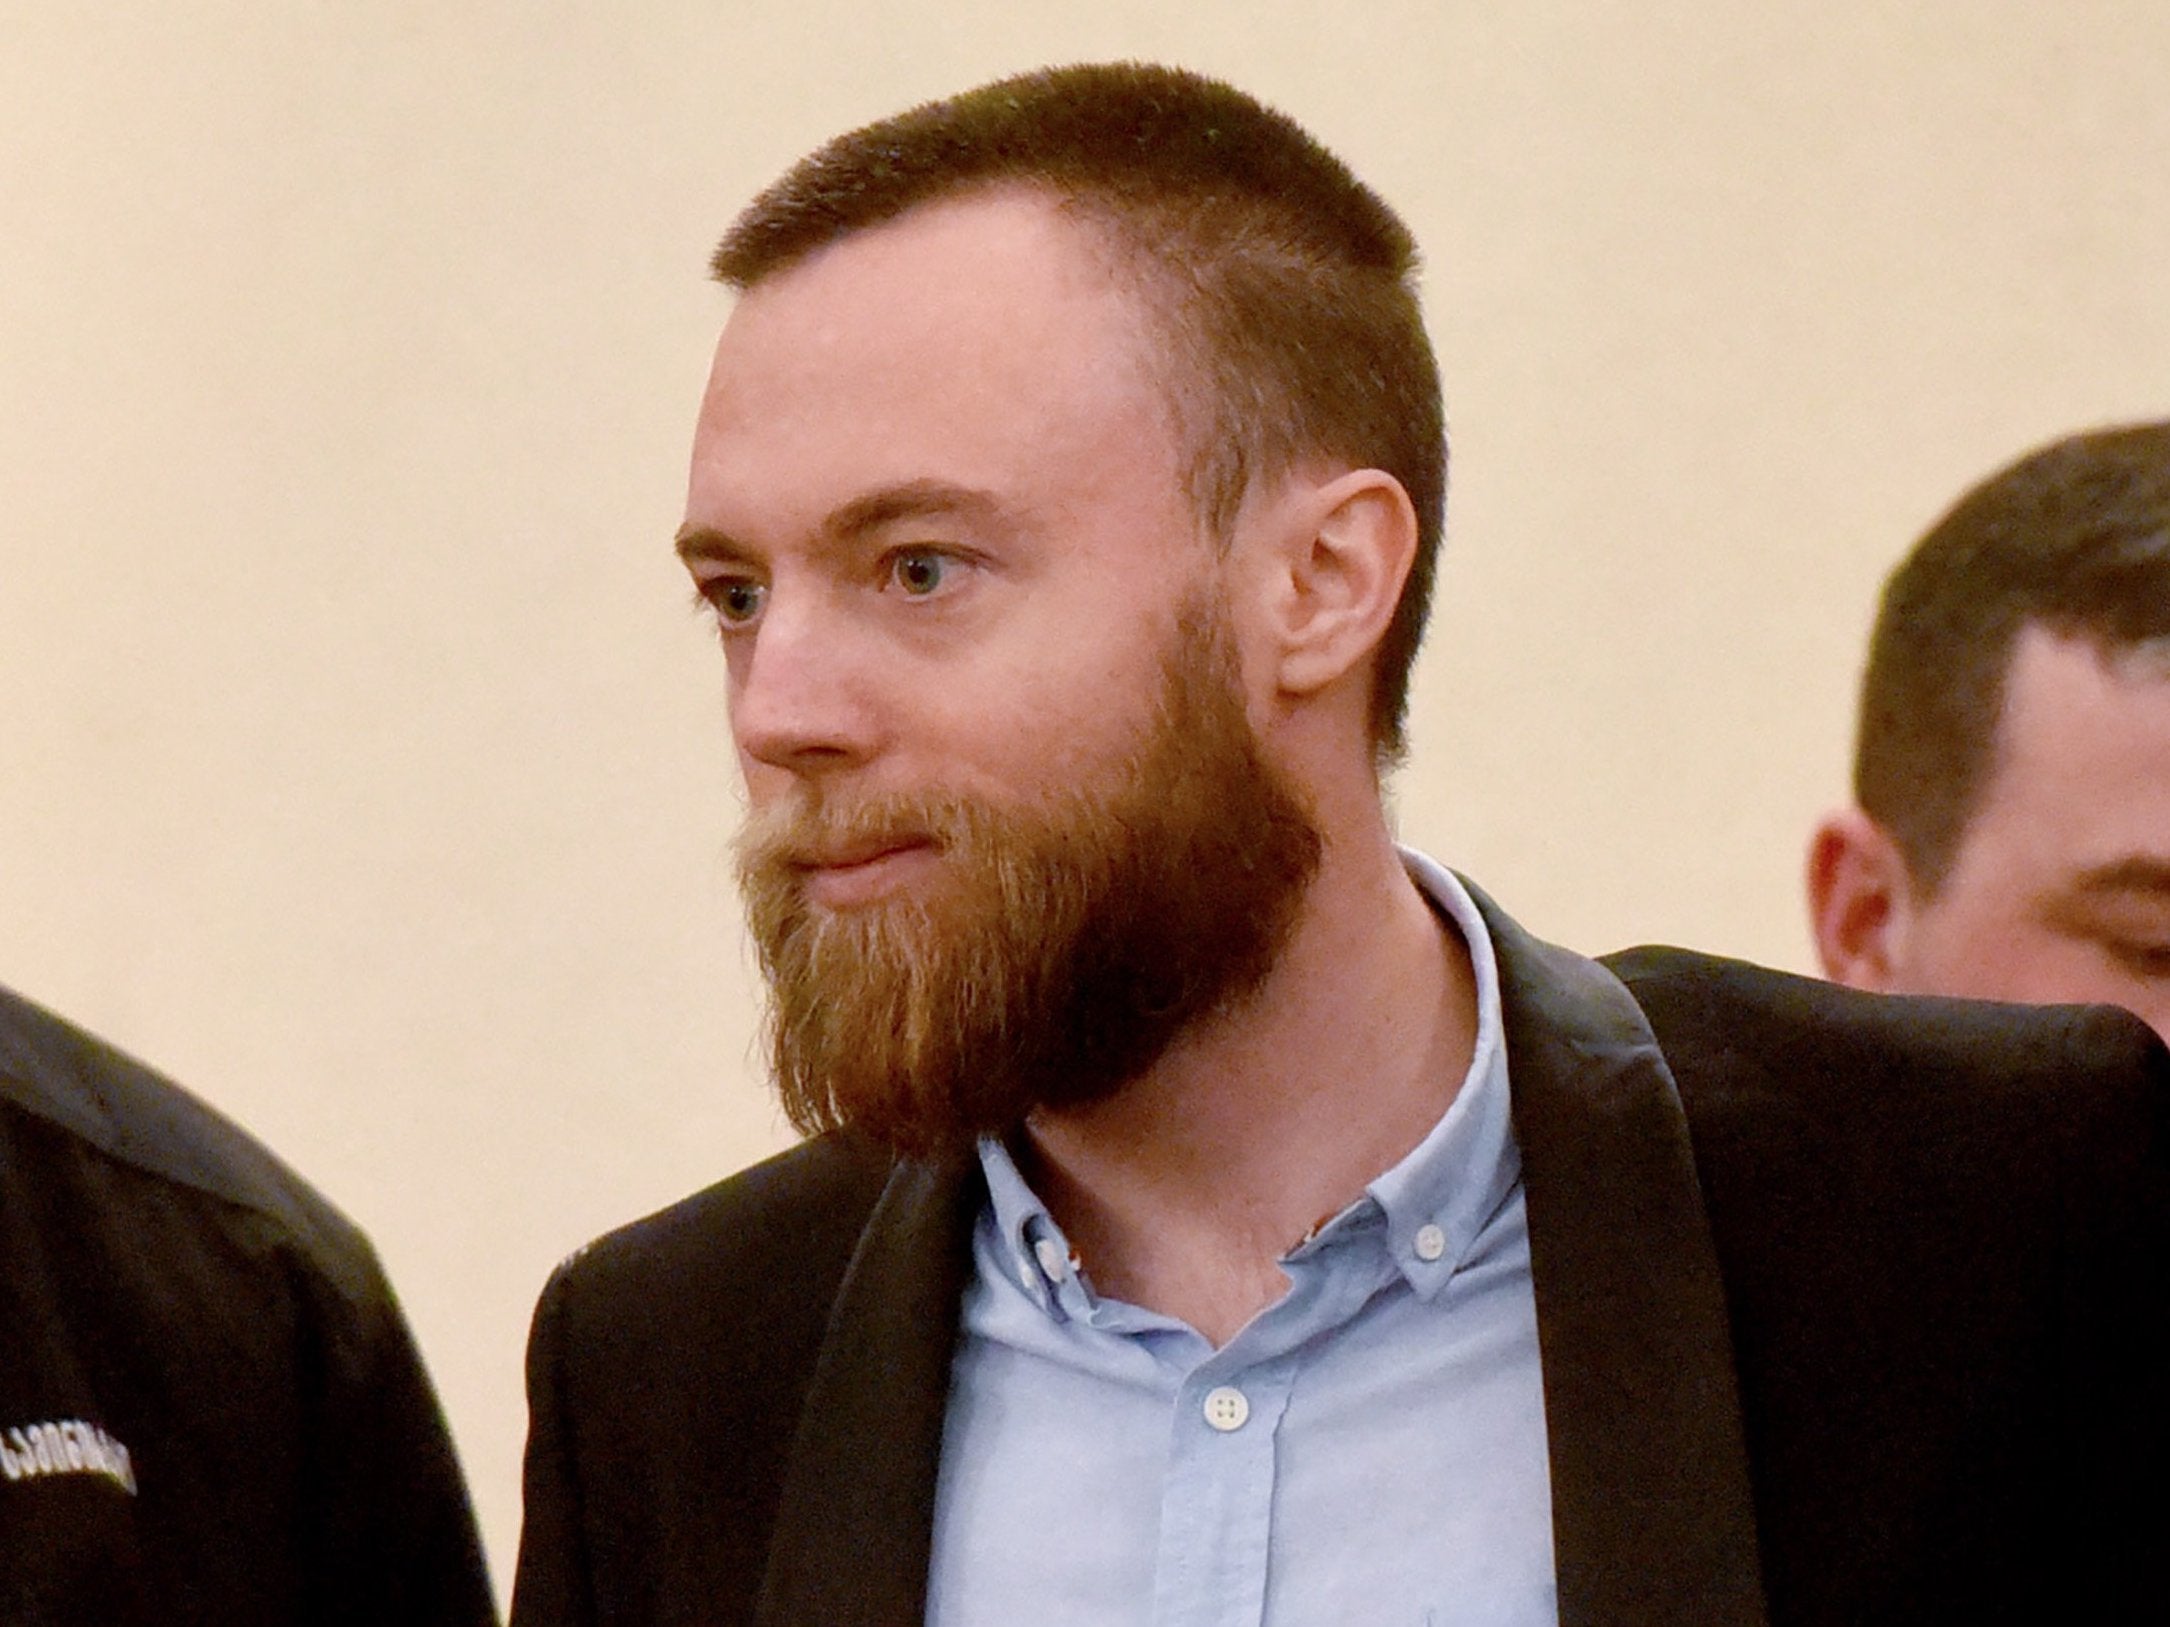 Speedboat killer Jack Shepherd has been freed from jail having only served half of his six-year sentence for crashing and killing a woman on their first date